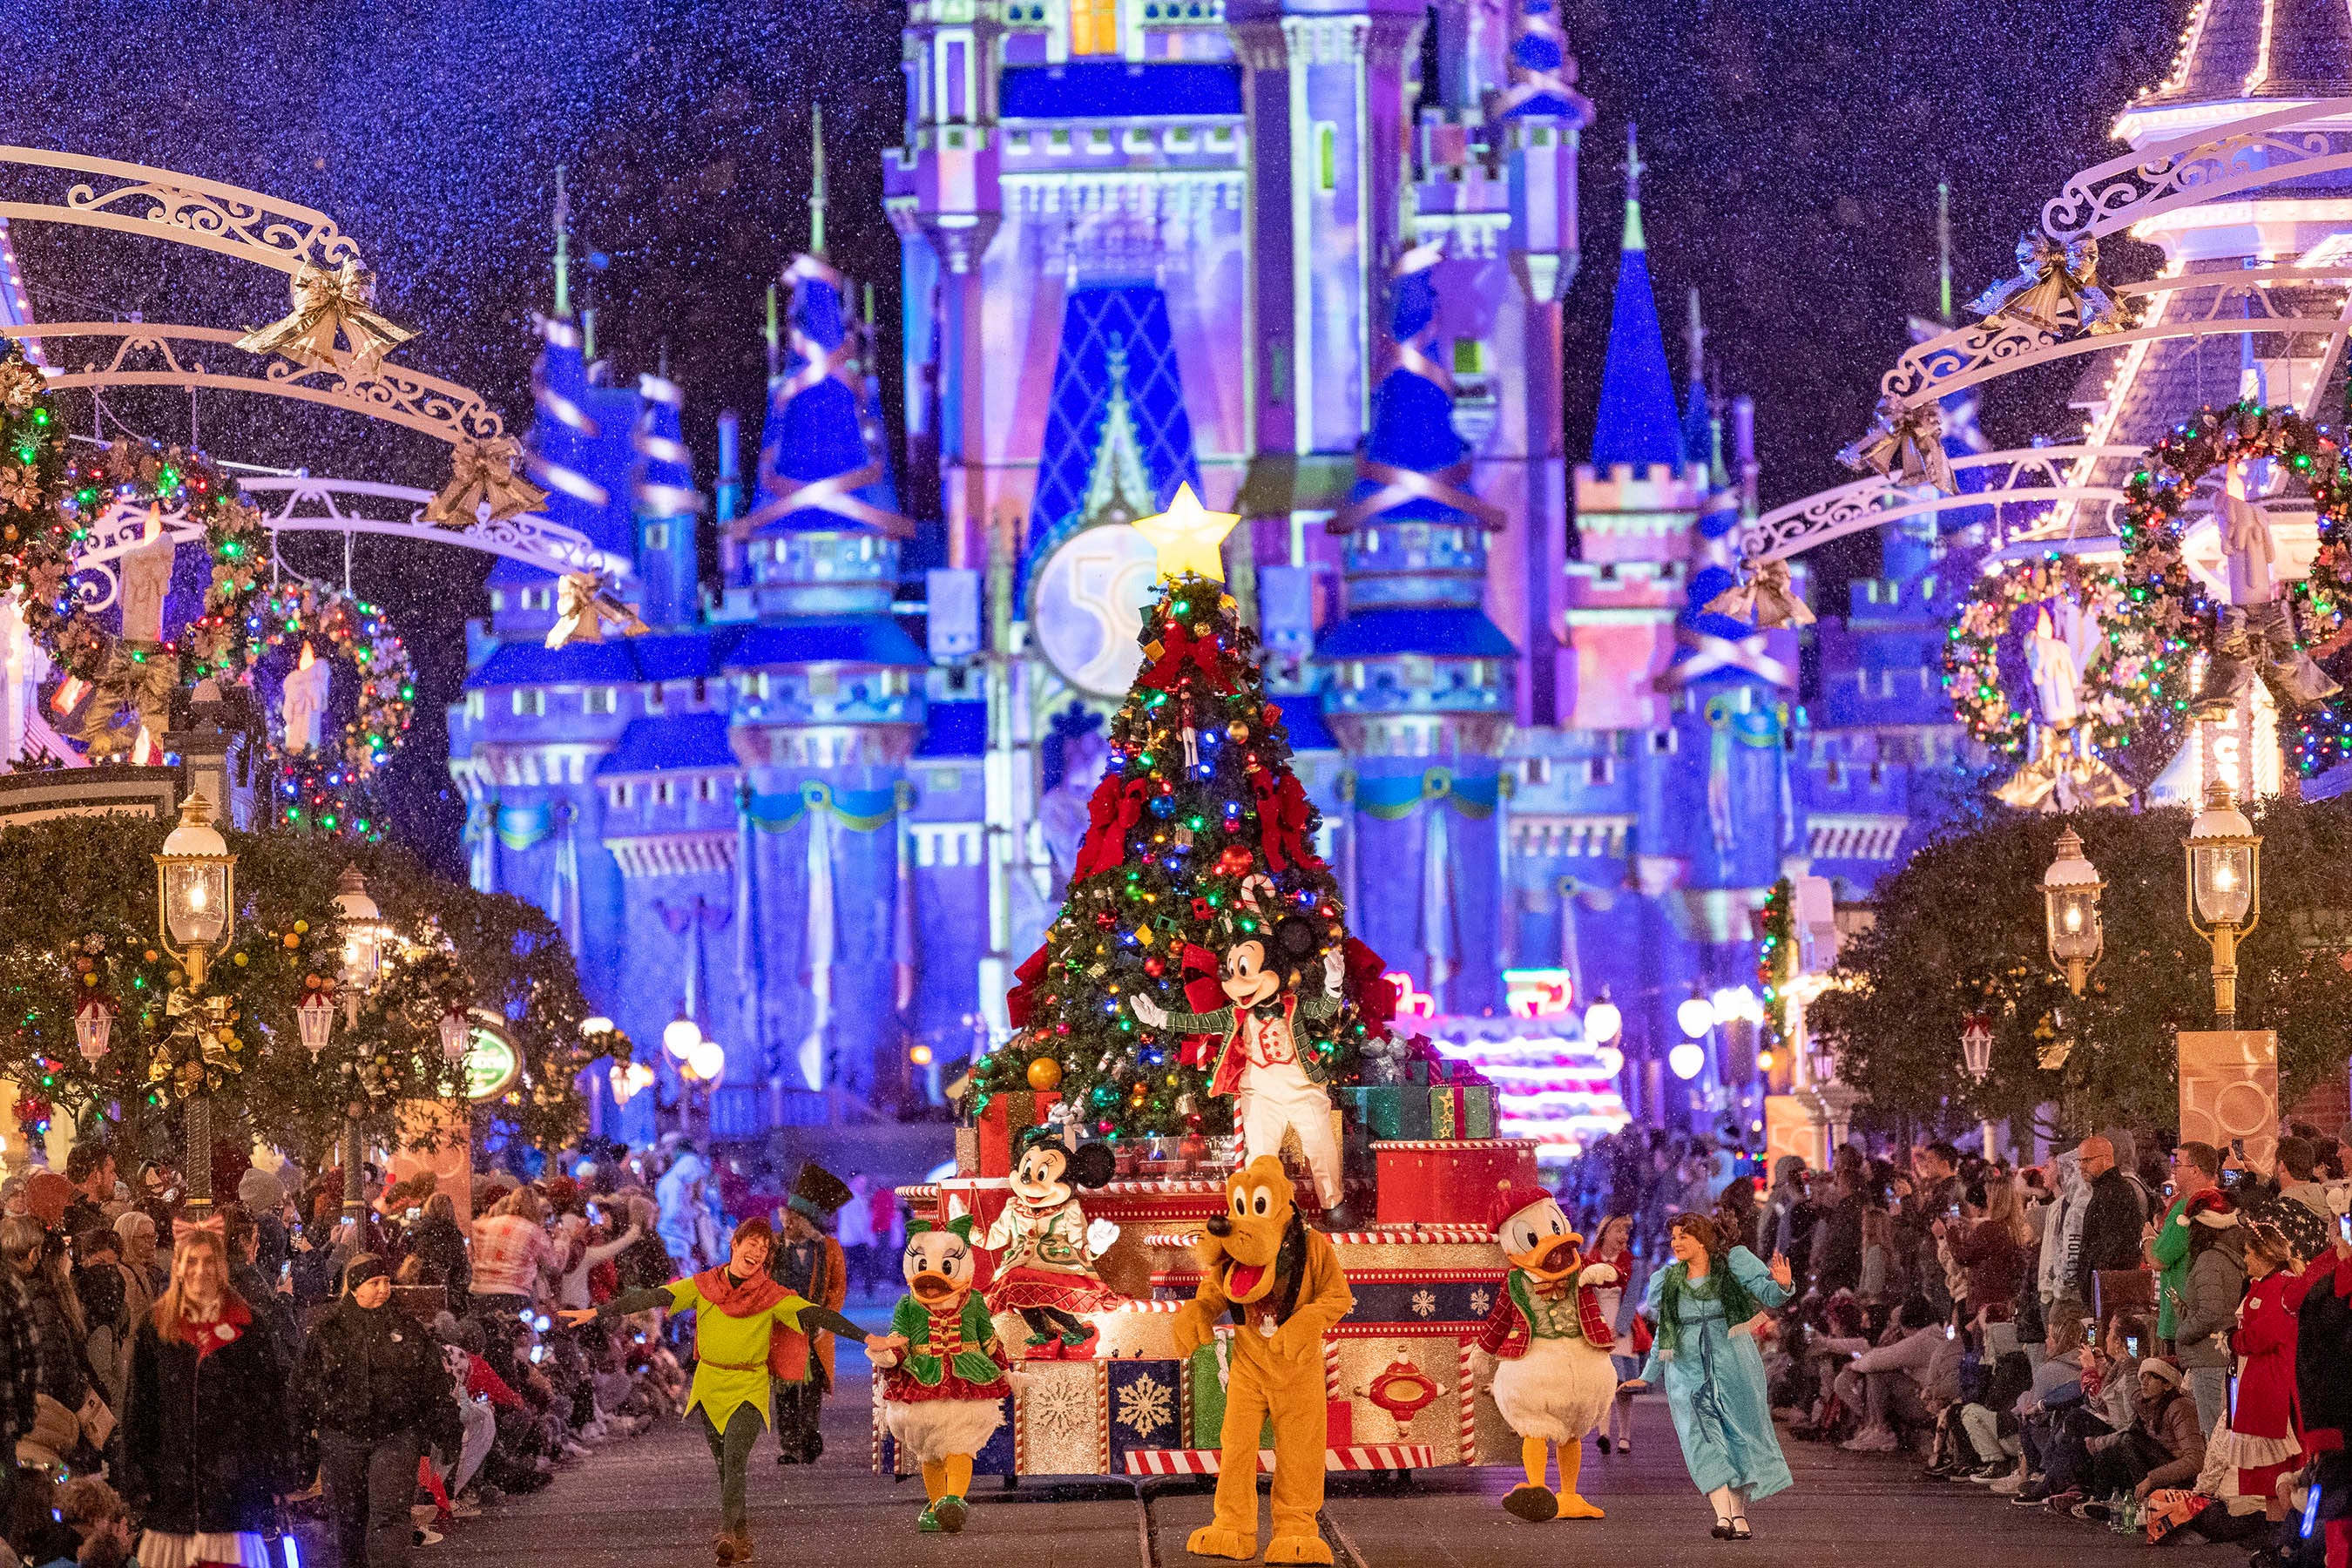 Disney World announces new holiday event, Mickey's Very Merry Christmas